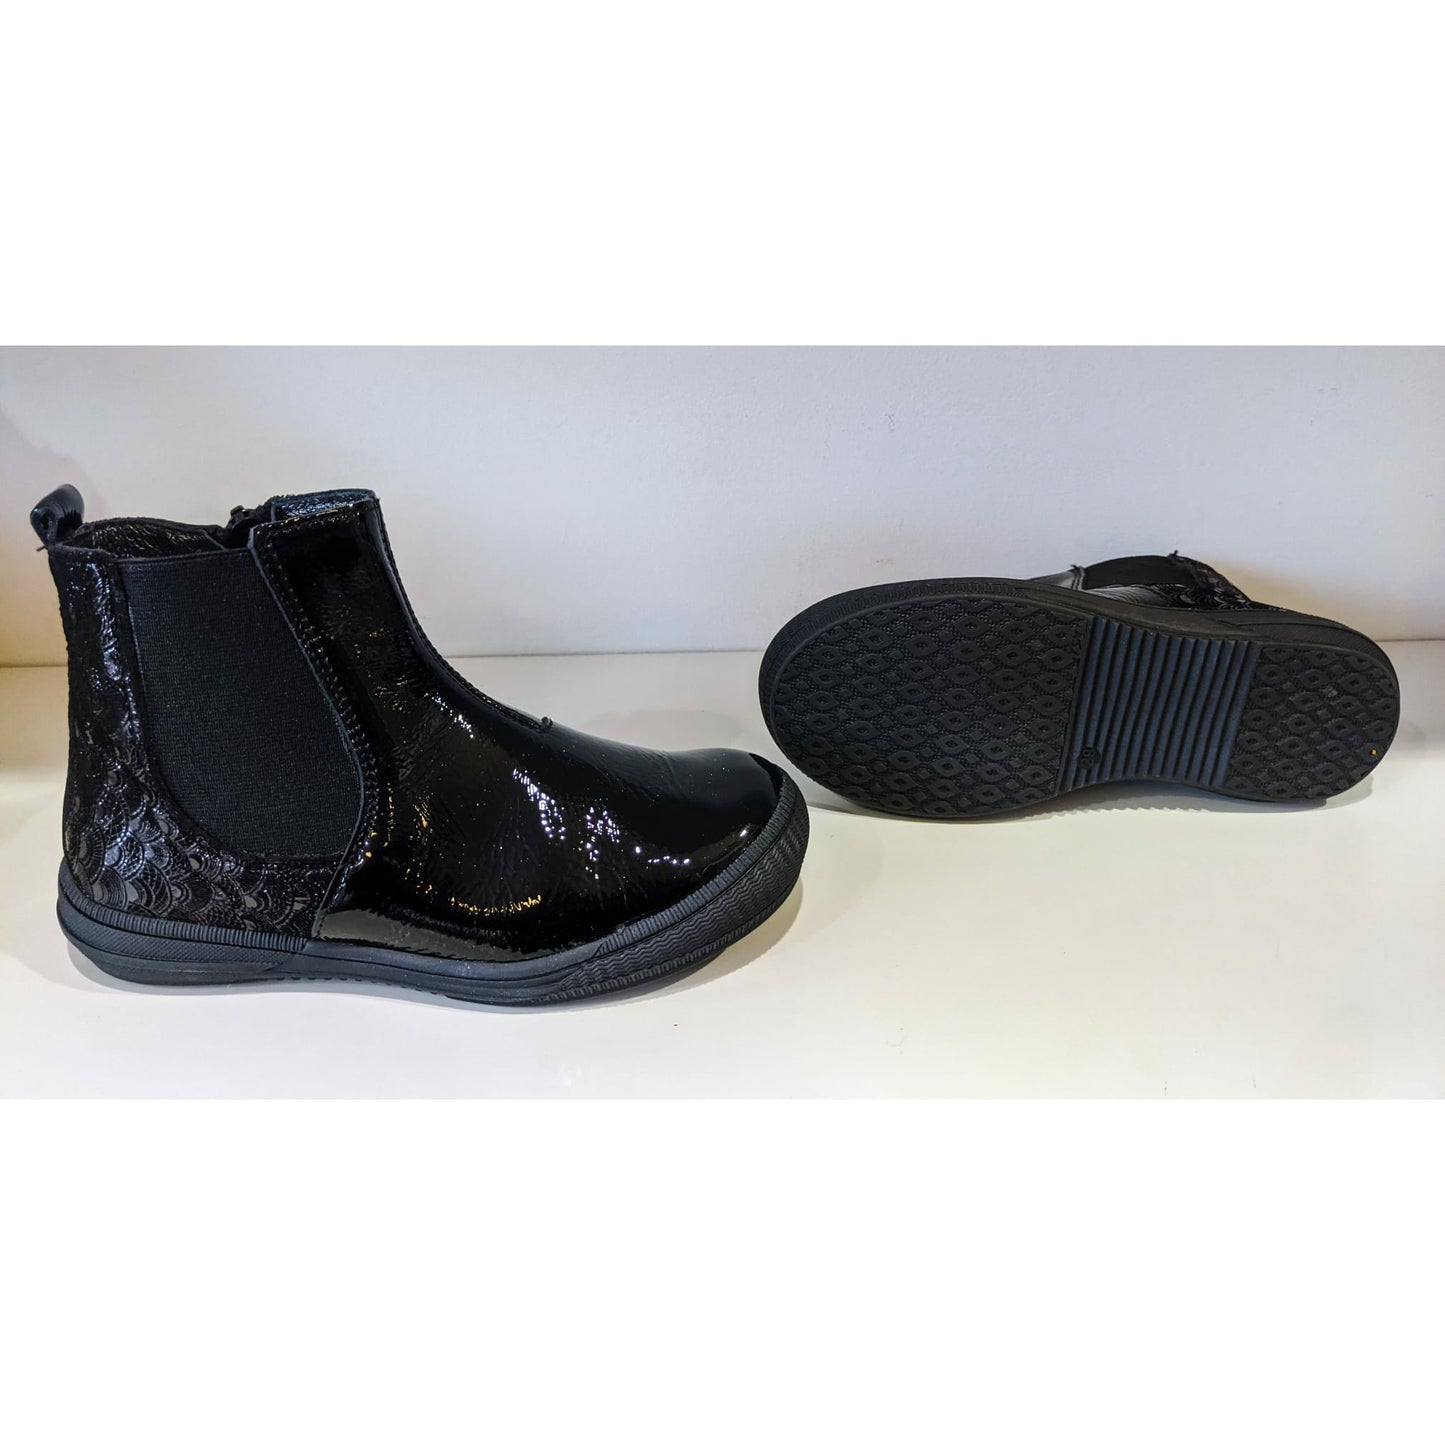 A girls ankle boot by Bopy, style Sylvaine, in black with zip fastening. Left side view.